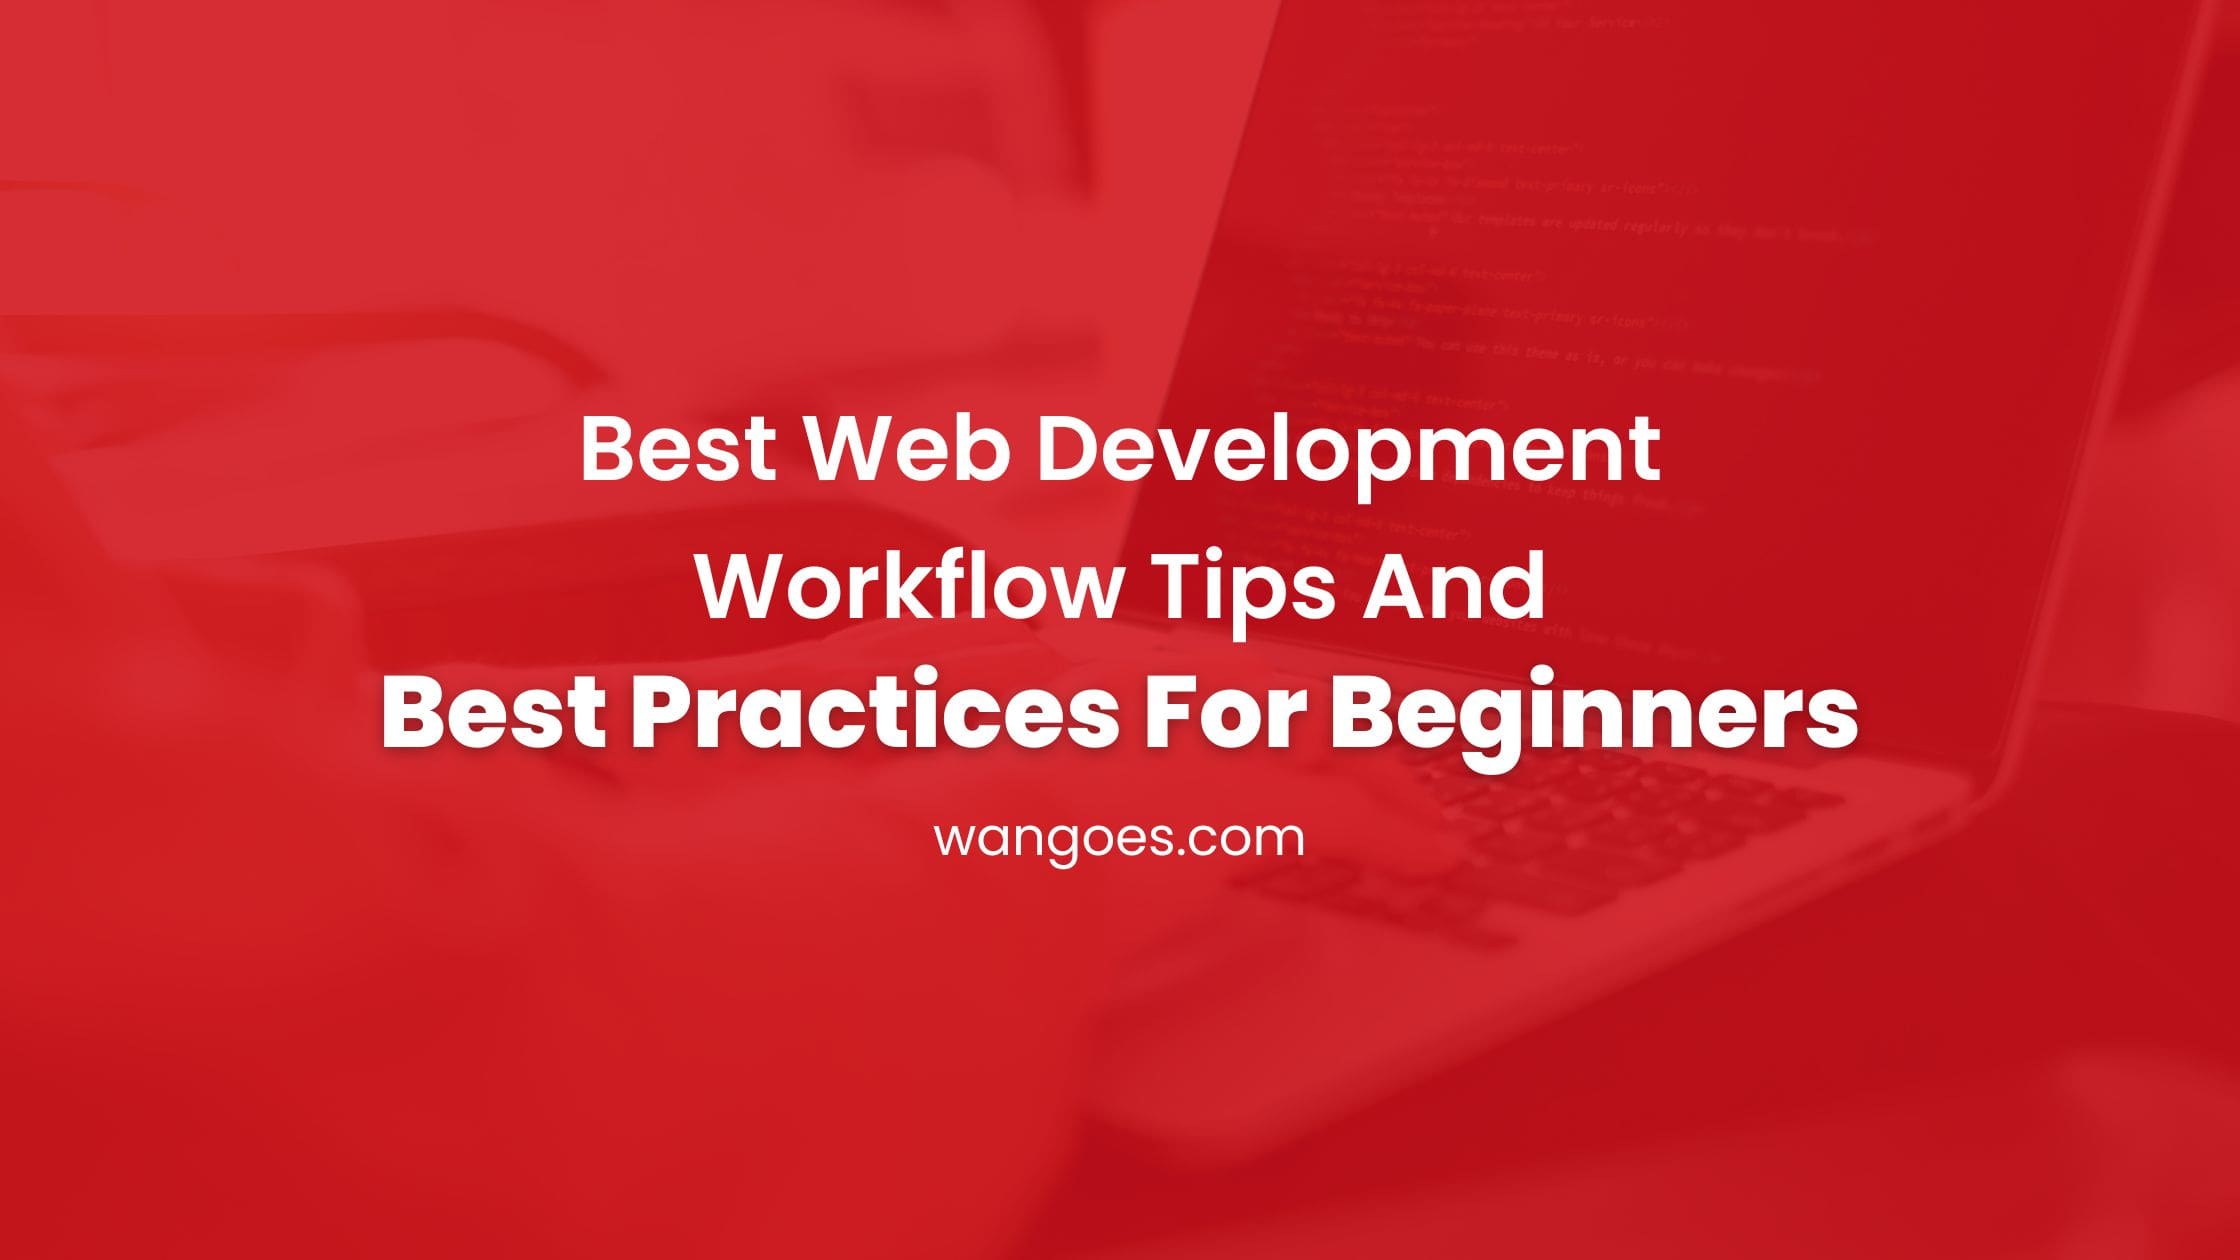 Best Web Development Workflow Tips And Best Practices For Beginners 